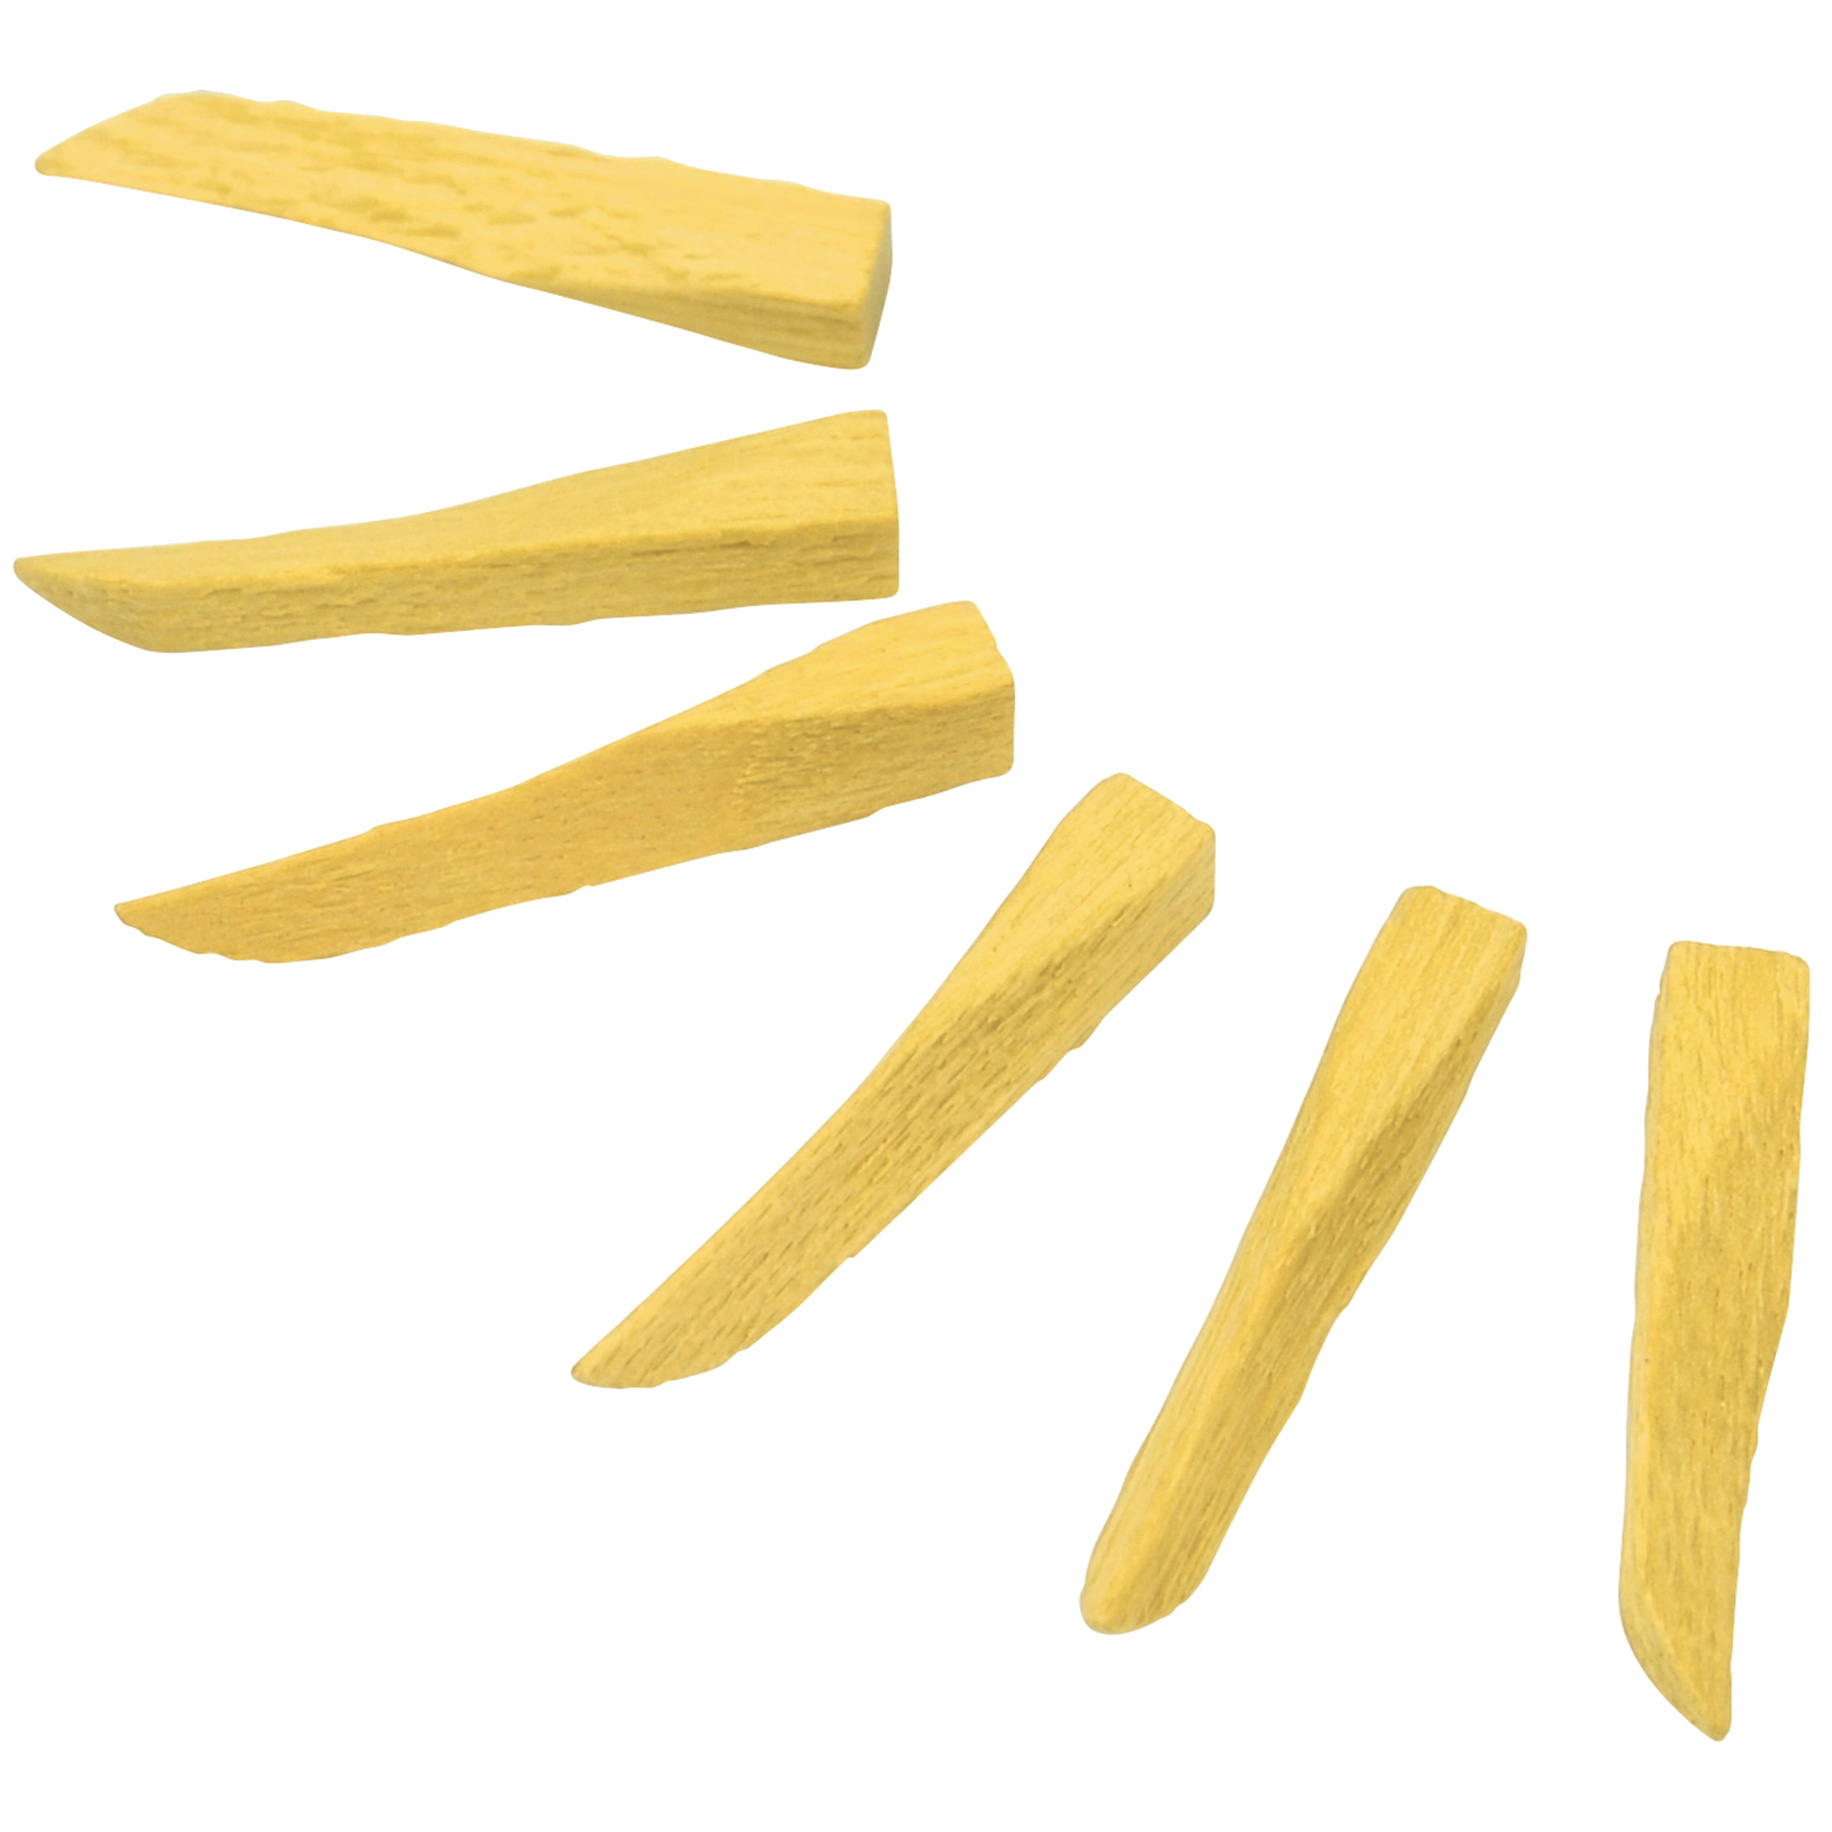 Sycamore Interdental Wedges Refills Yellow (Ref. 822/40) 